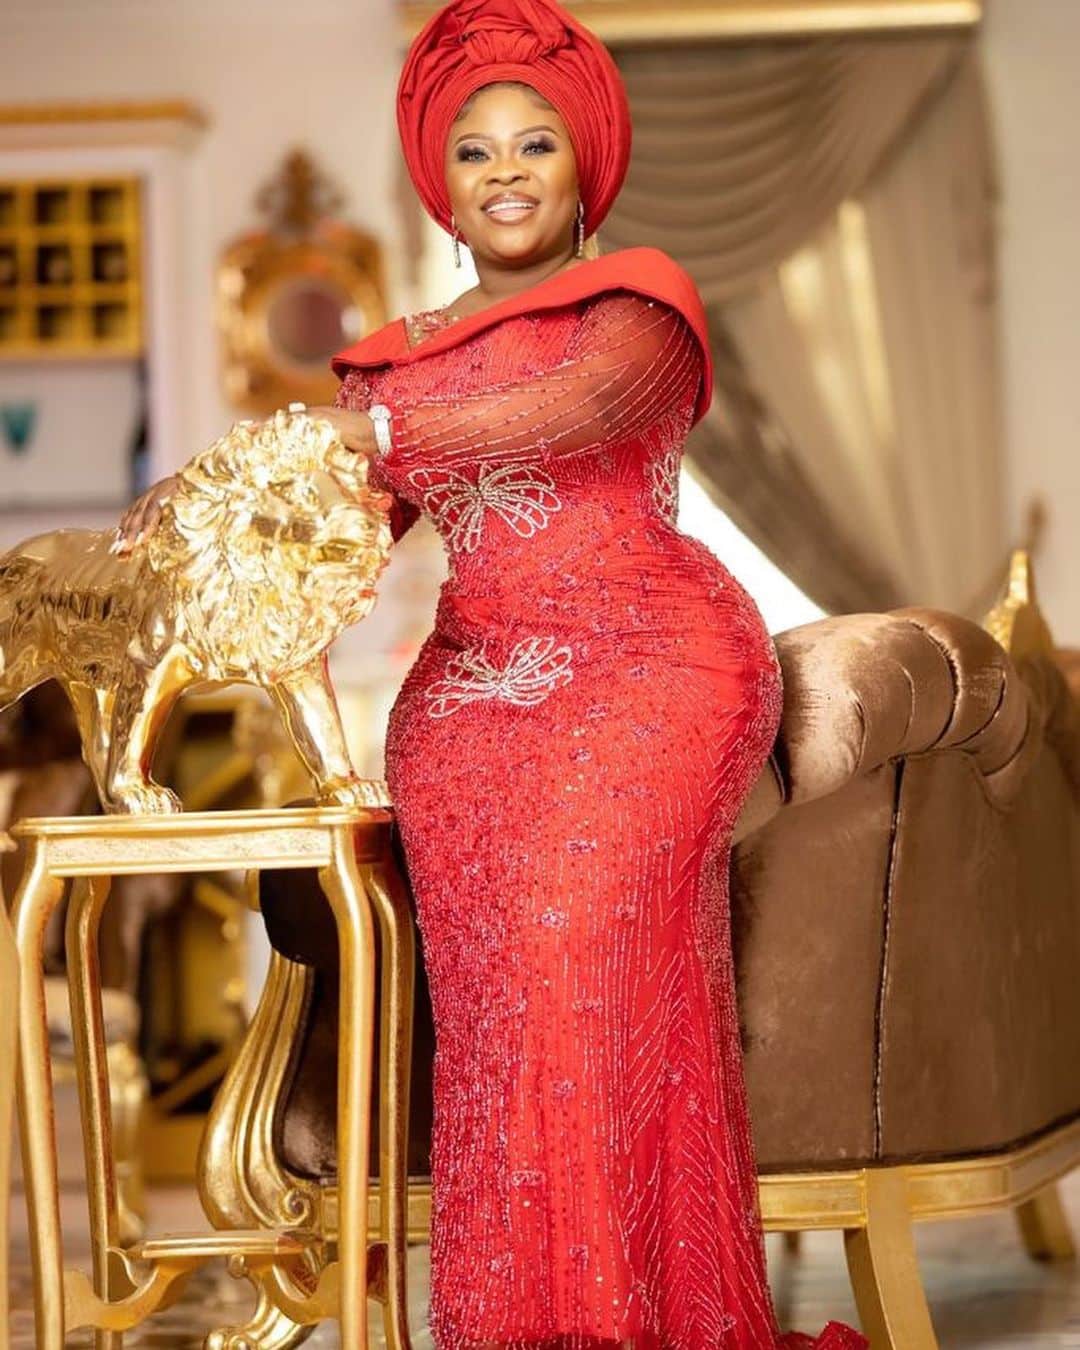 See the stunning pictures Obofowaa uploaded as she celebrates her birthday